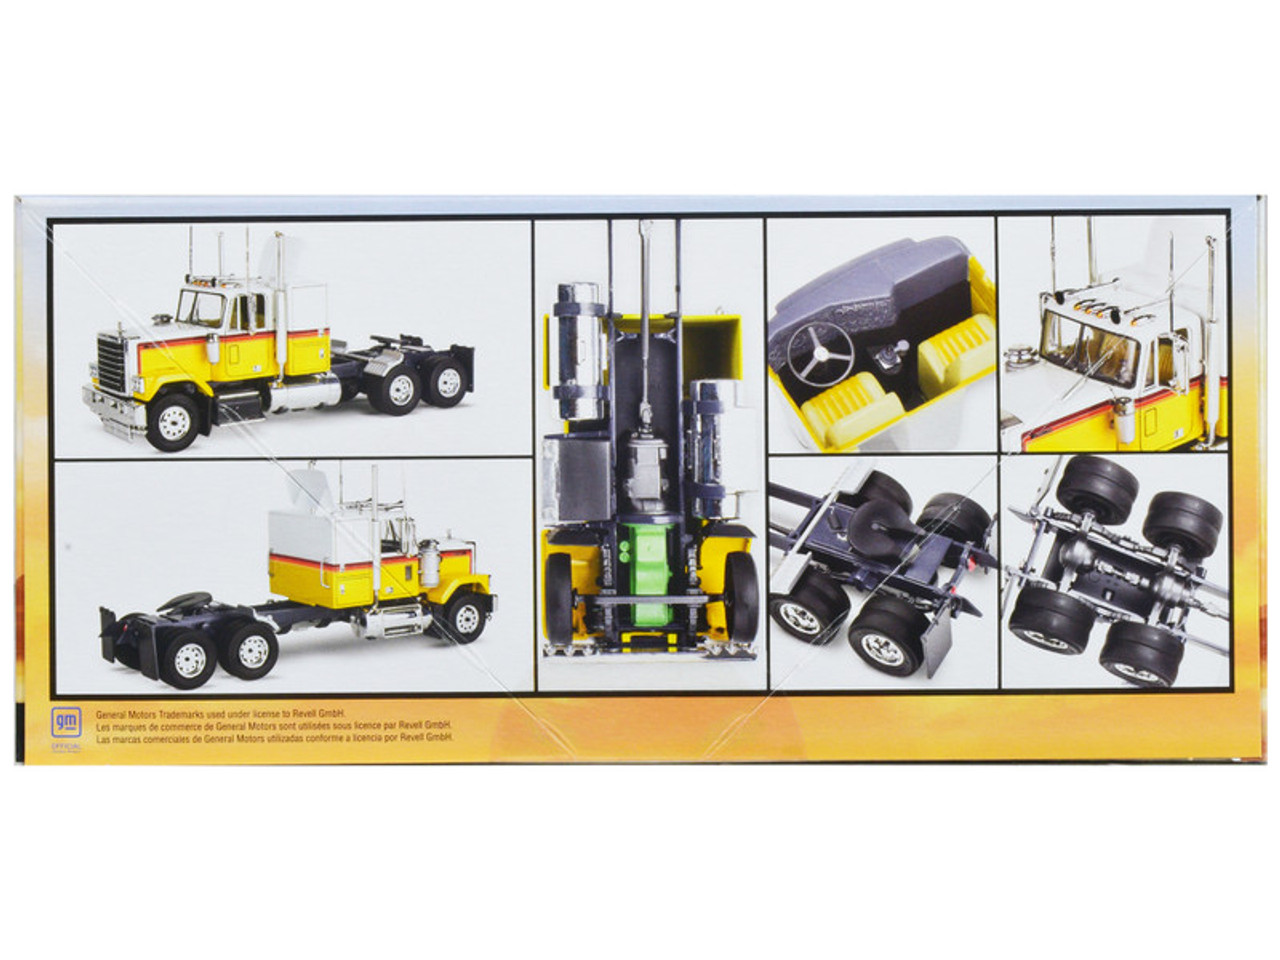 Level 4 Model Kit 1978 Chevrolet Bison Truck Tractor 1/32 Scale Model by Revell